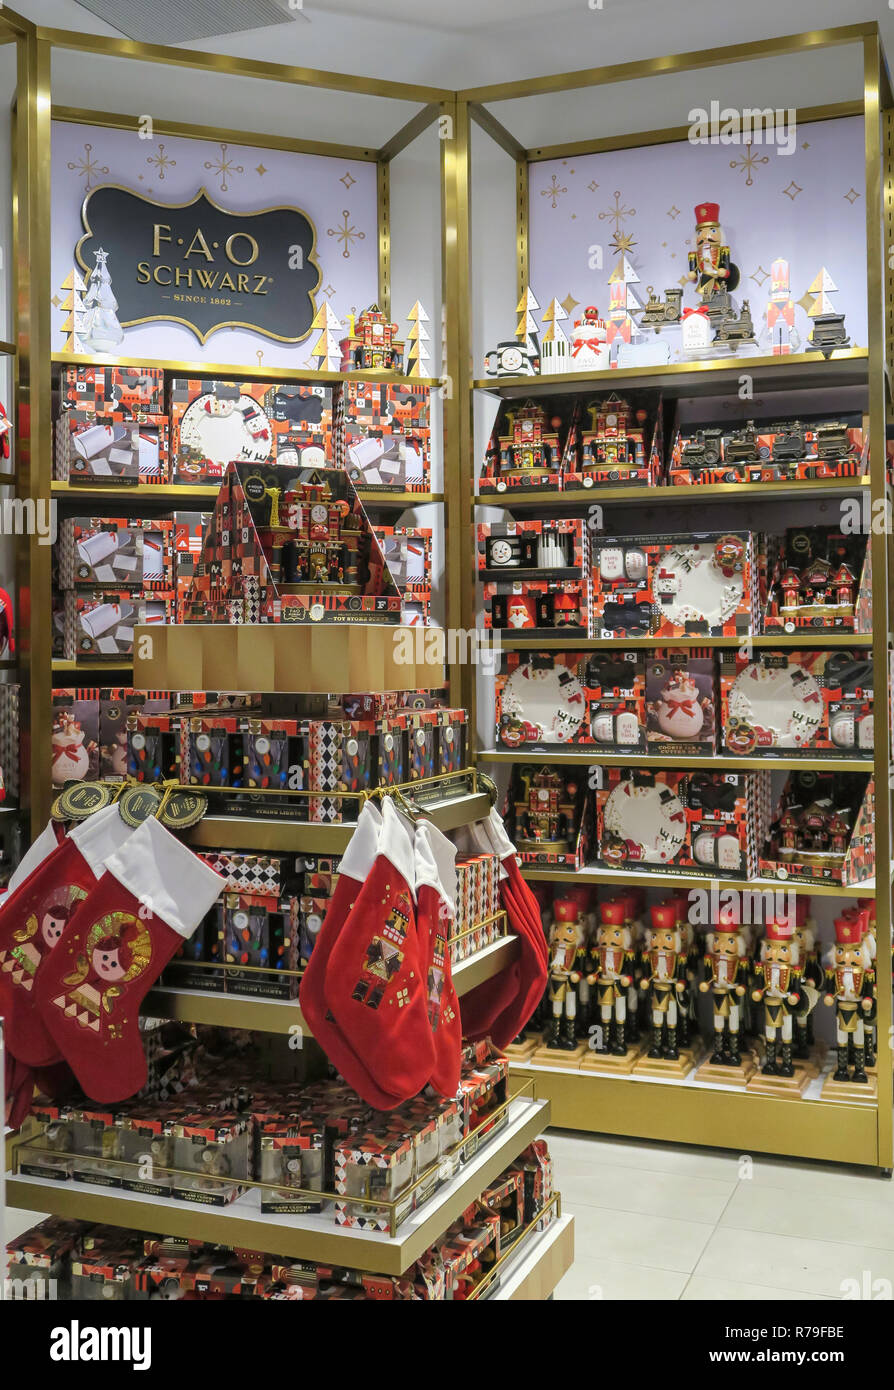 Younkers adds iconic FAO Schwarz toy store to many of its locations